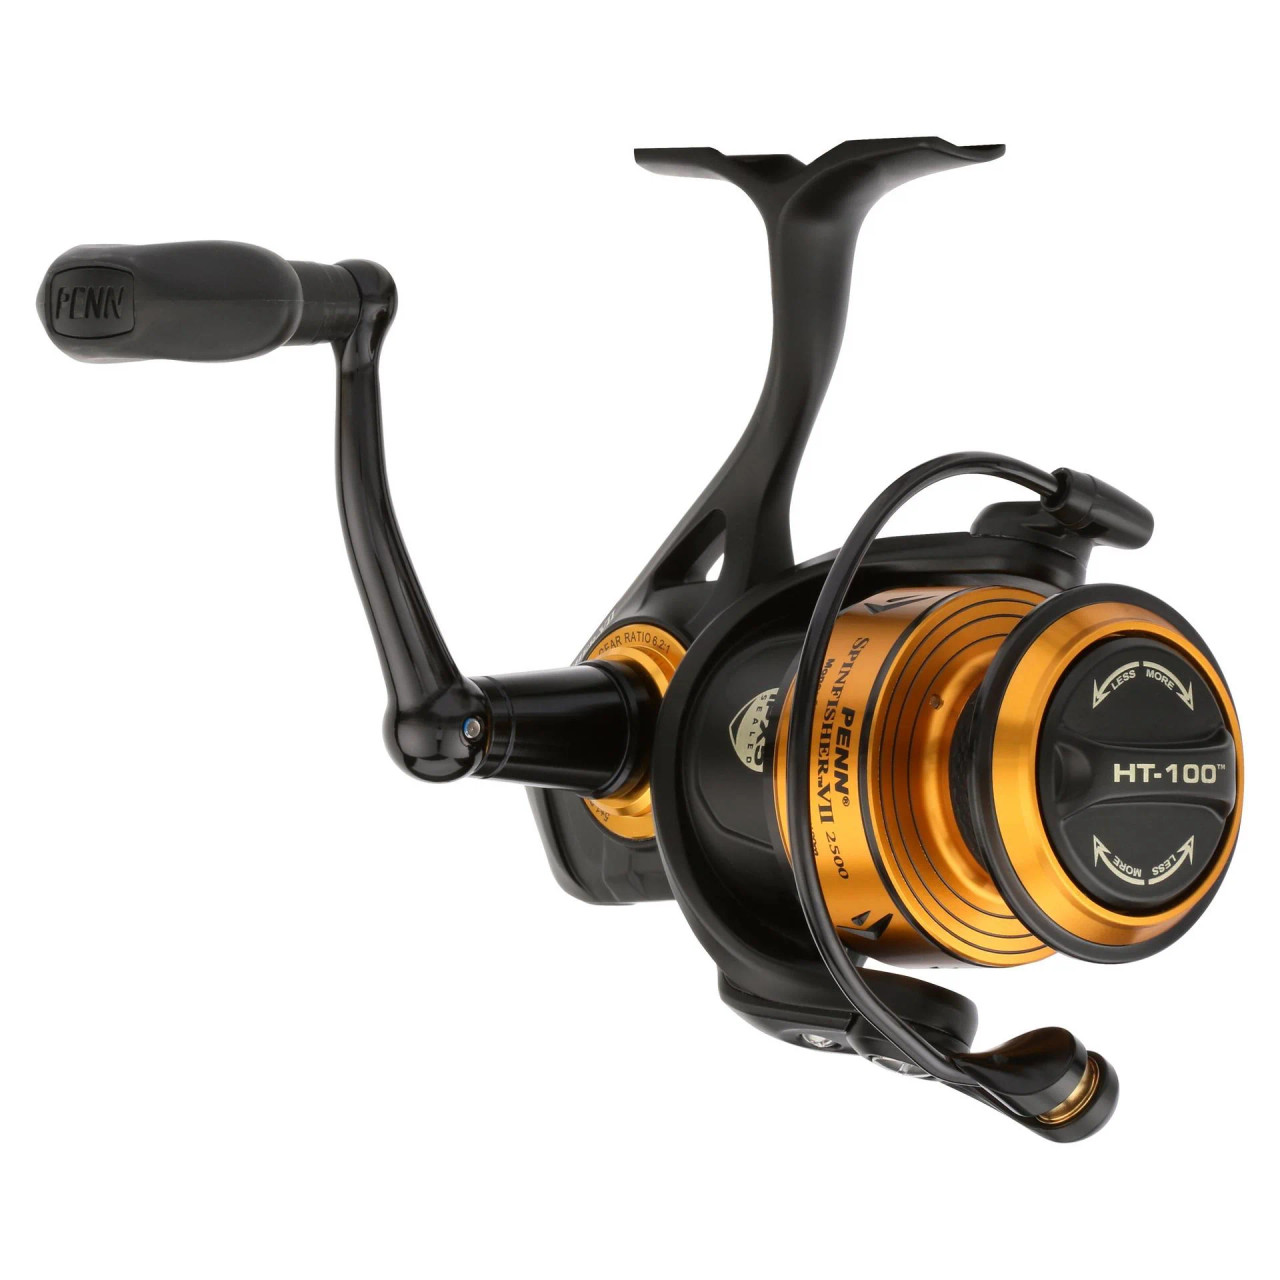 Penn Right Saltwater Fishing Reels for sale